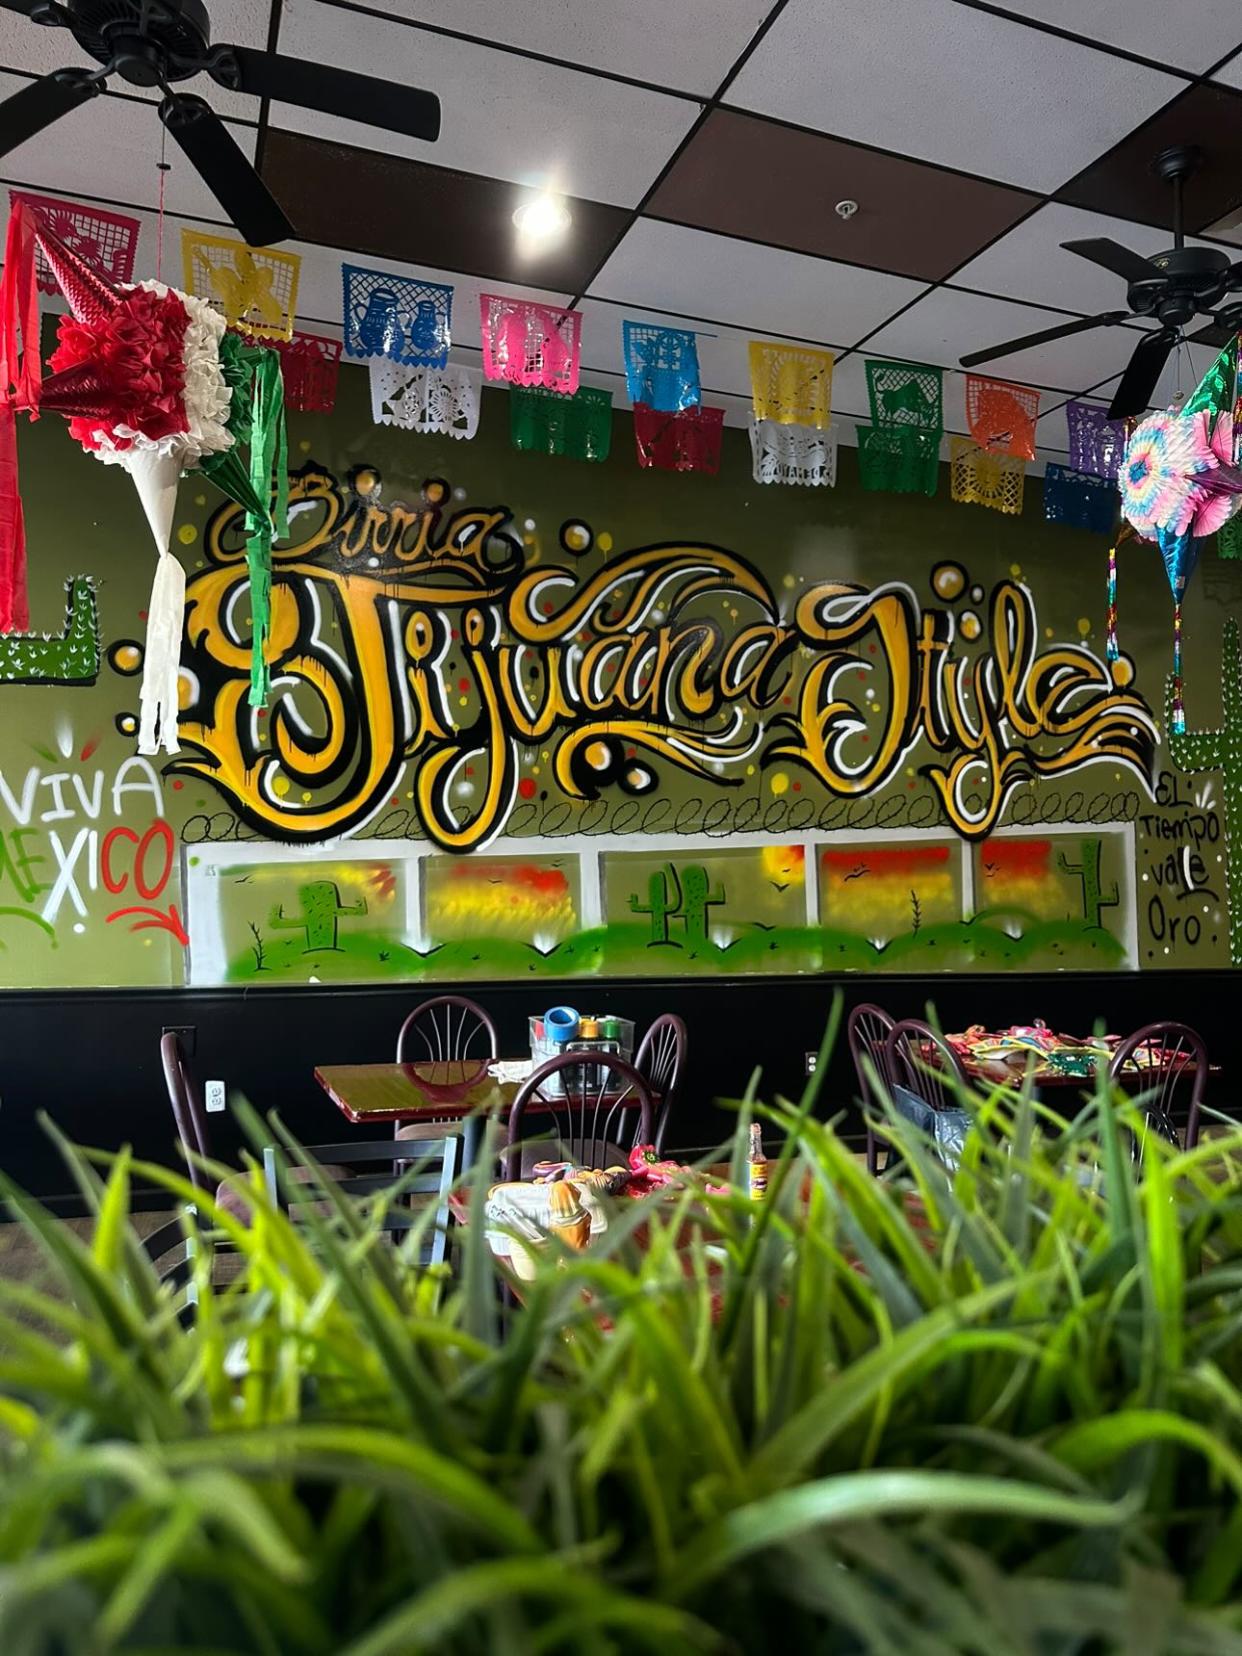 A mural inside the soon-to-open Los Barbaros Birria in the Manahawkin section of Stafford.